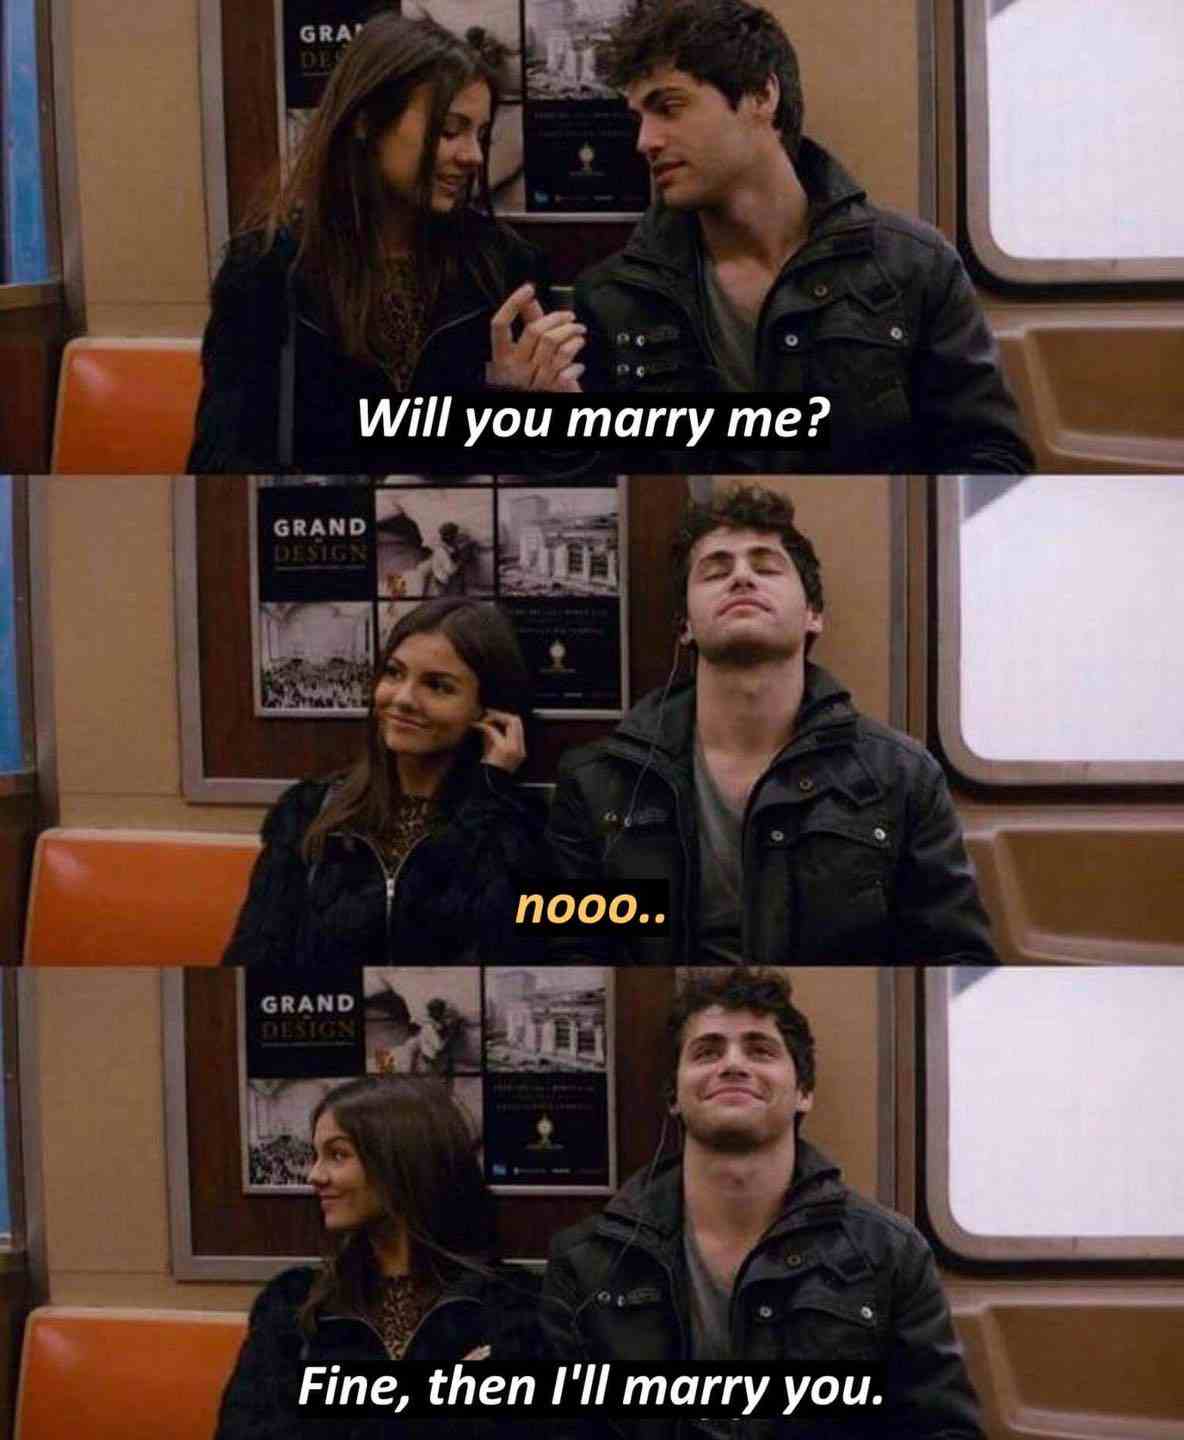 Will you marry me?, Fine...